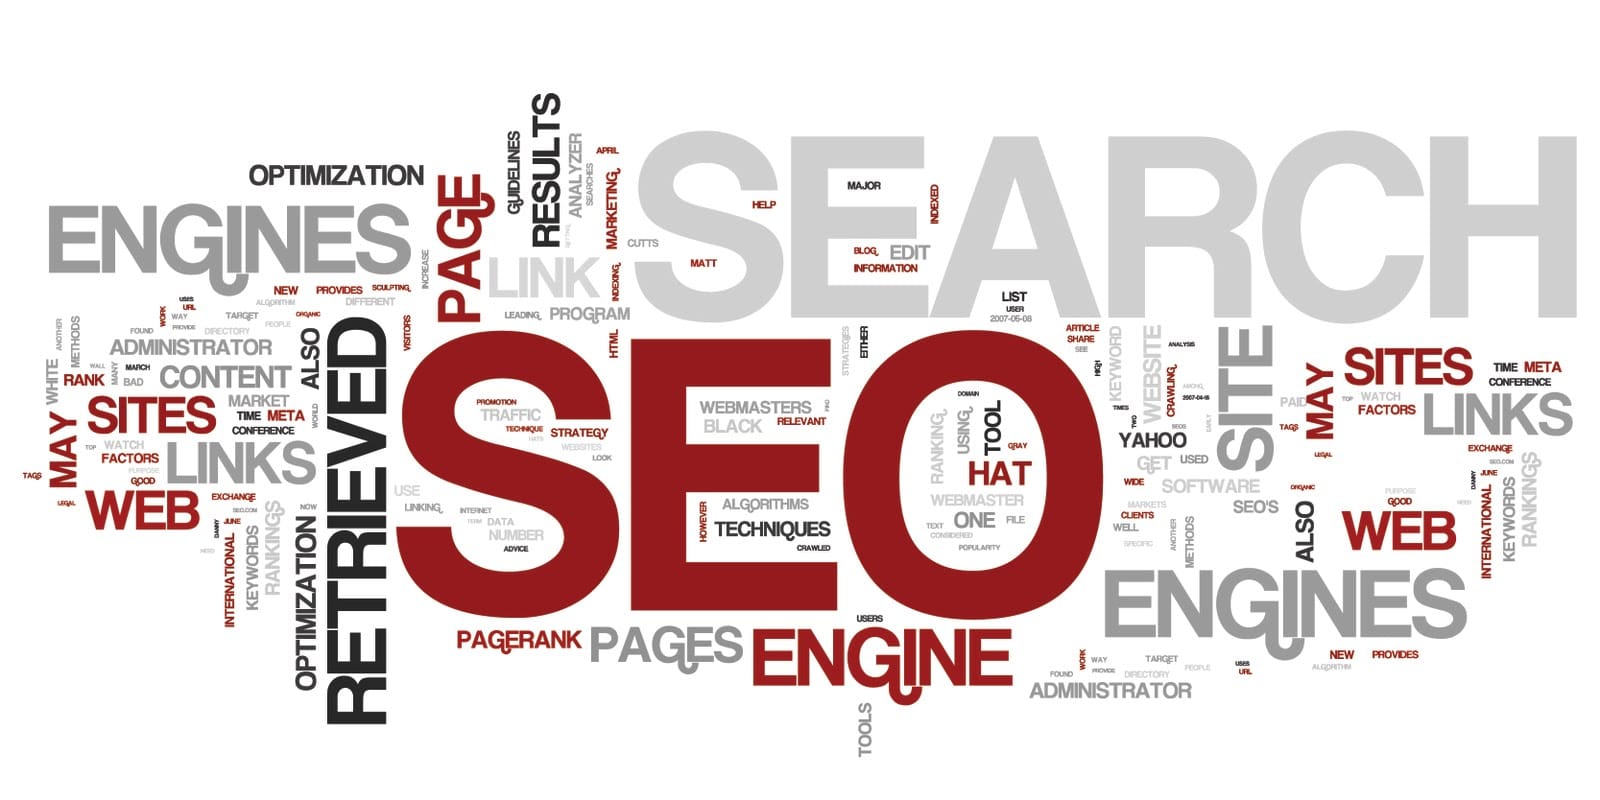 Beyond the Keyword: Creative Ways to Engage in SEO